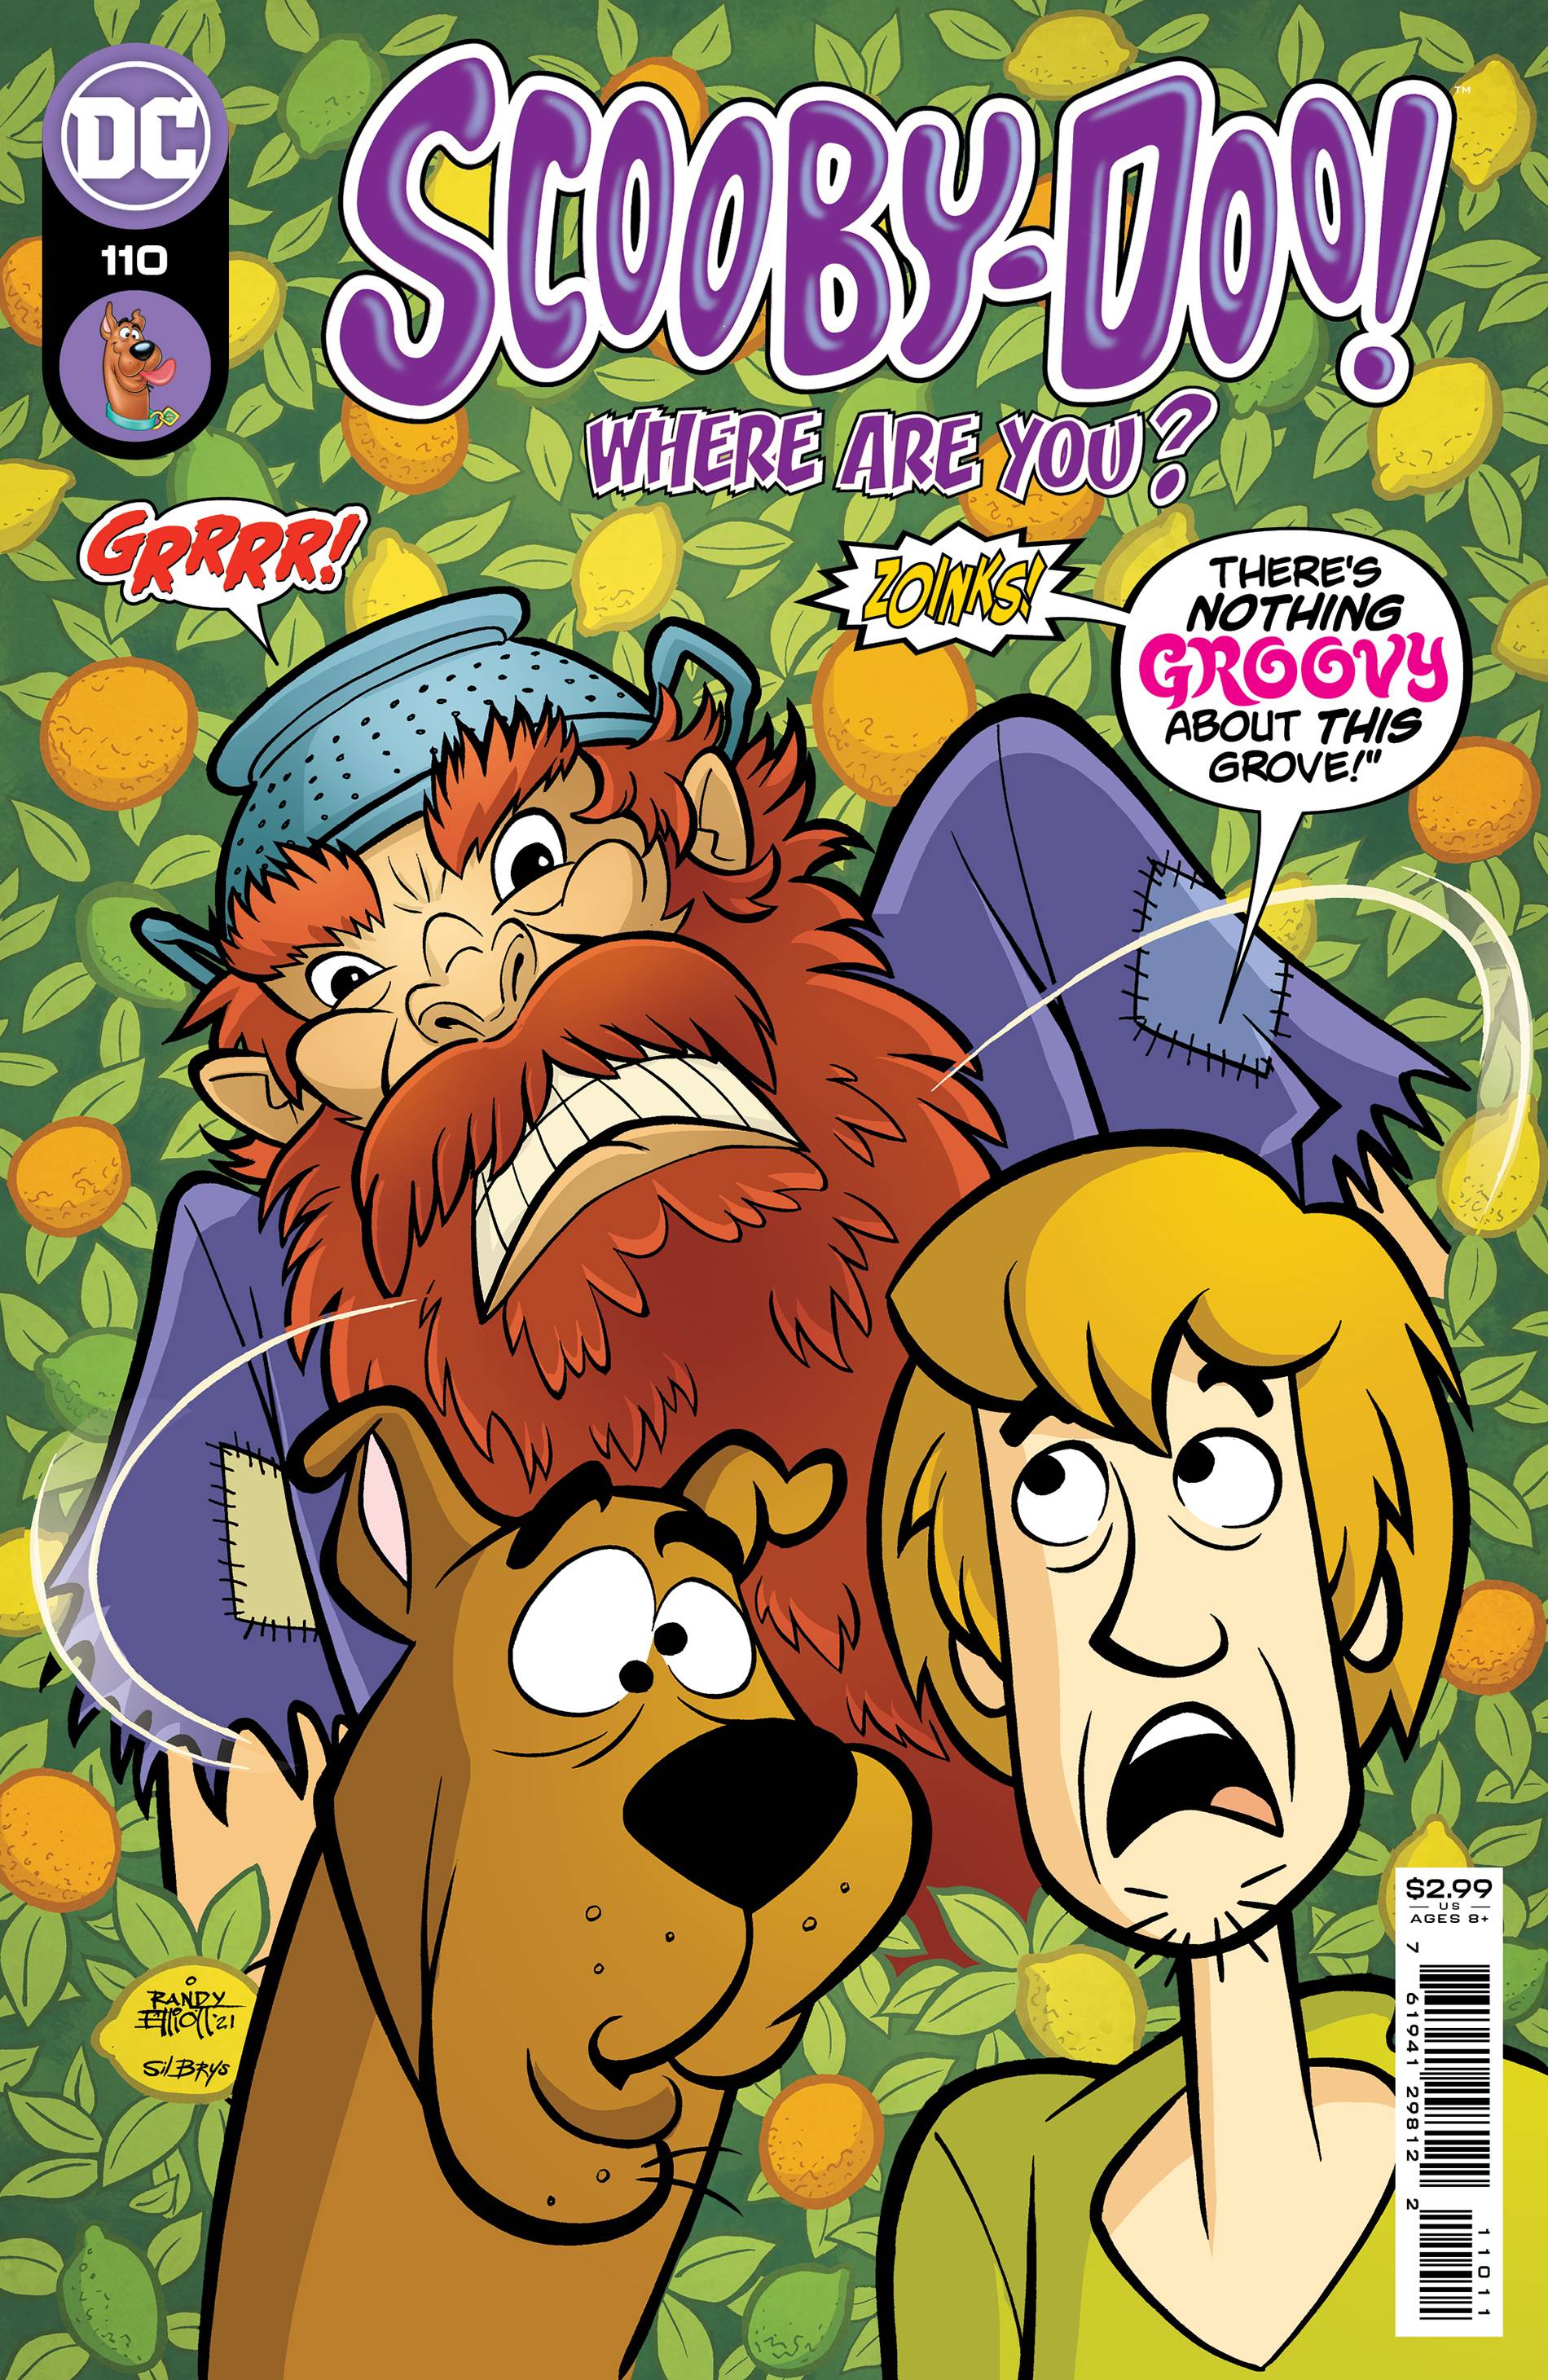 SCOOBY DOO WHERE ARE YOU #110 (MR)